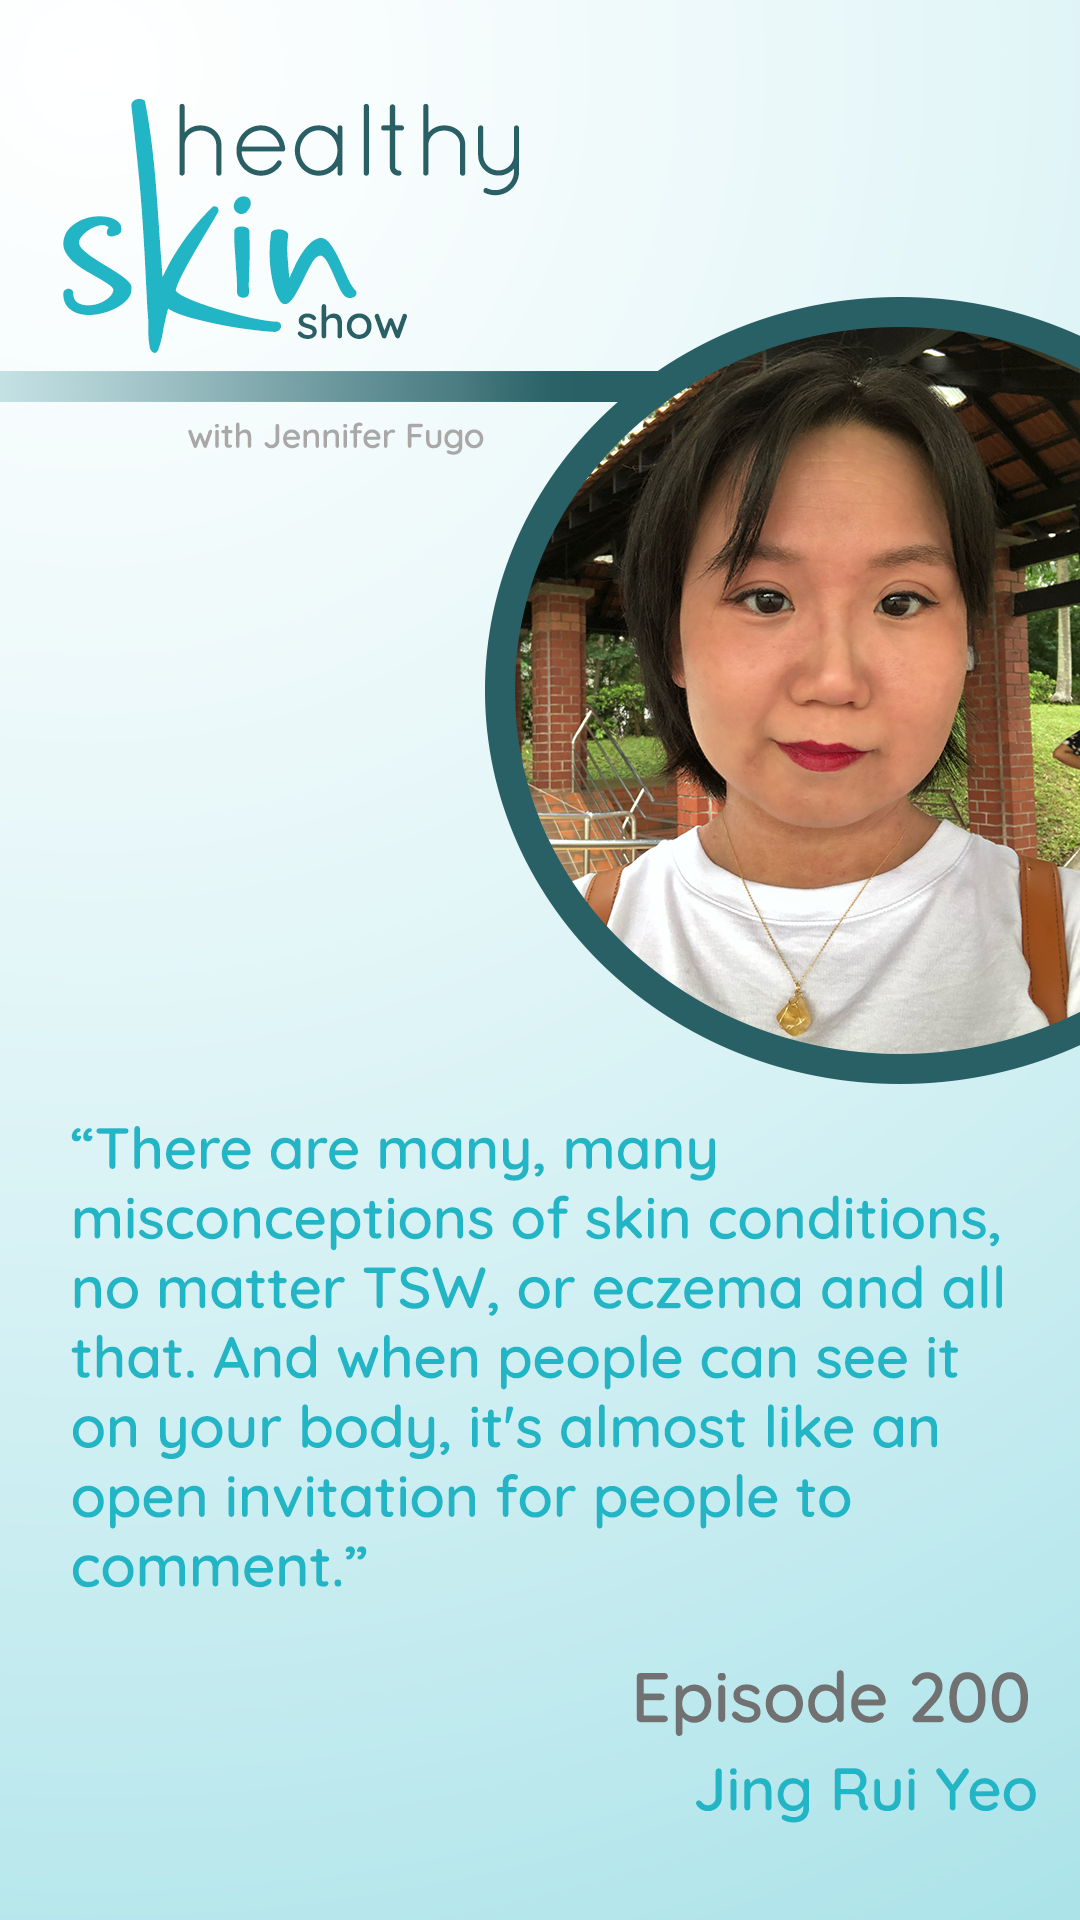 “There are many, many misconceptions of skin conditions, no matter TSW, or eczema and all that. And when people can see it on your body, it's almost like an open invitation for people to comment.”